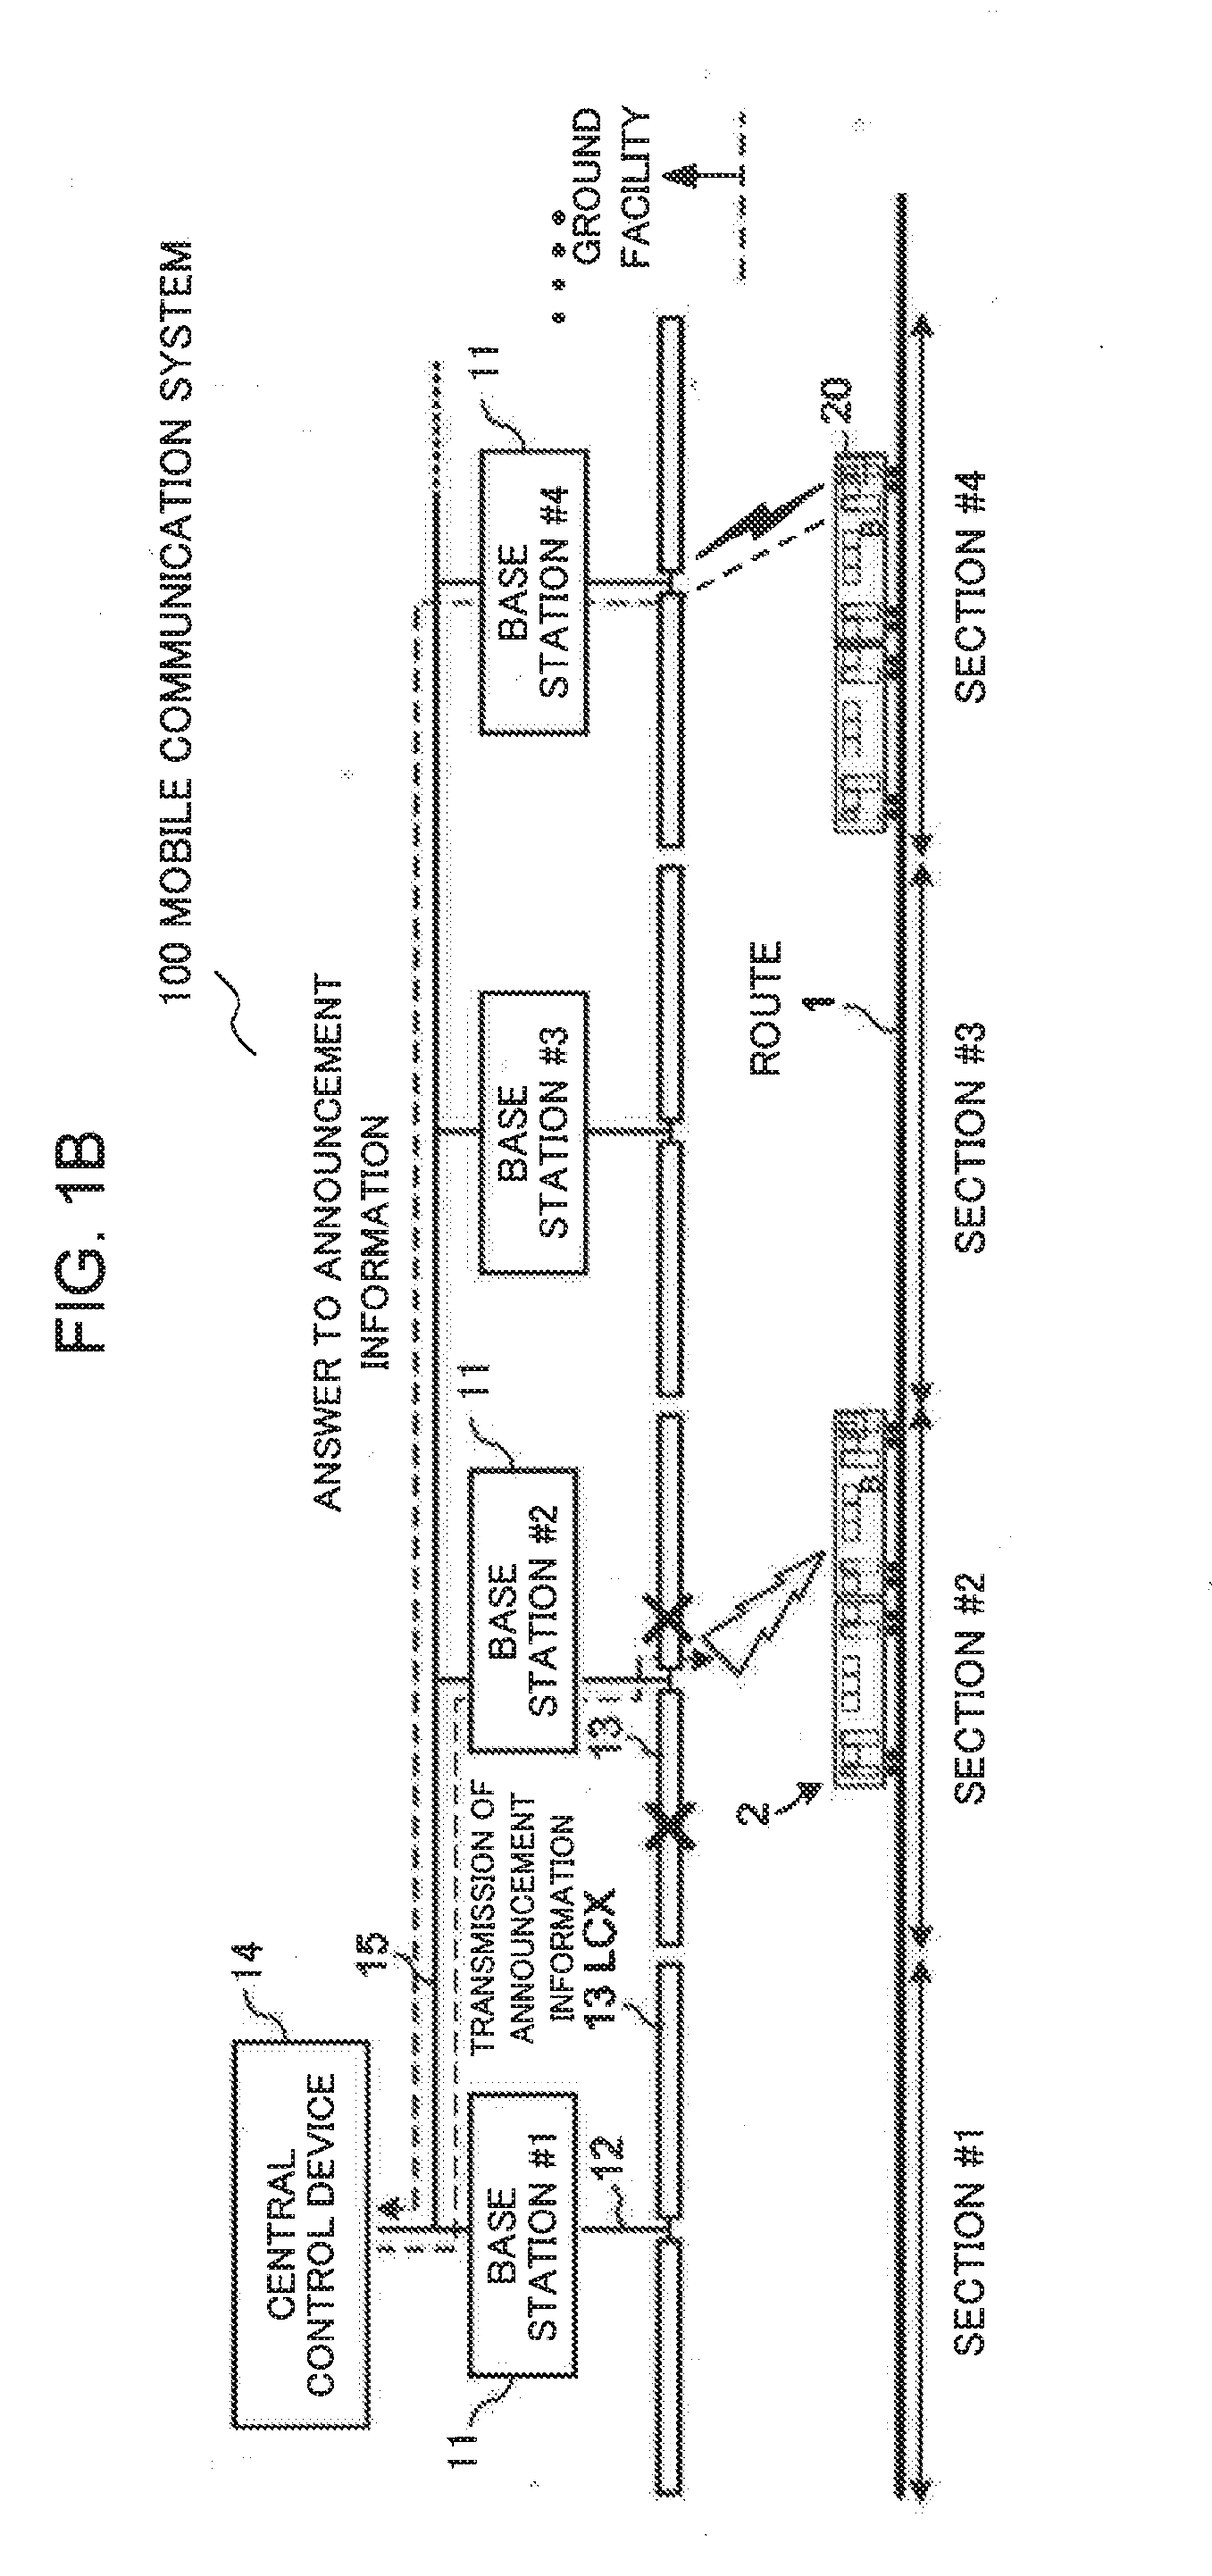 Fault detection method and mobile wireless system